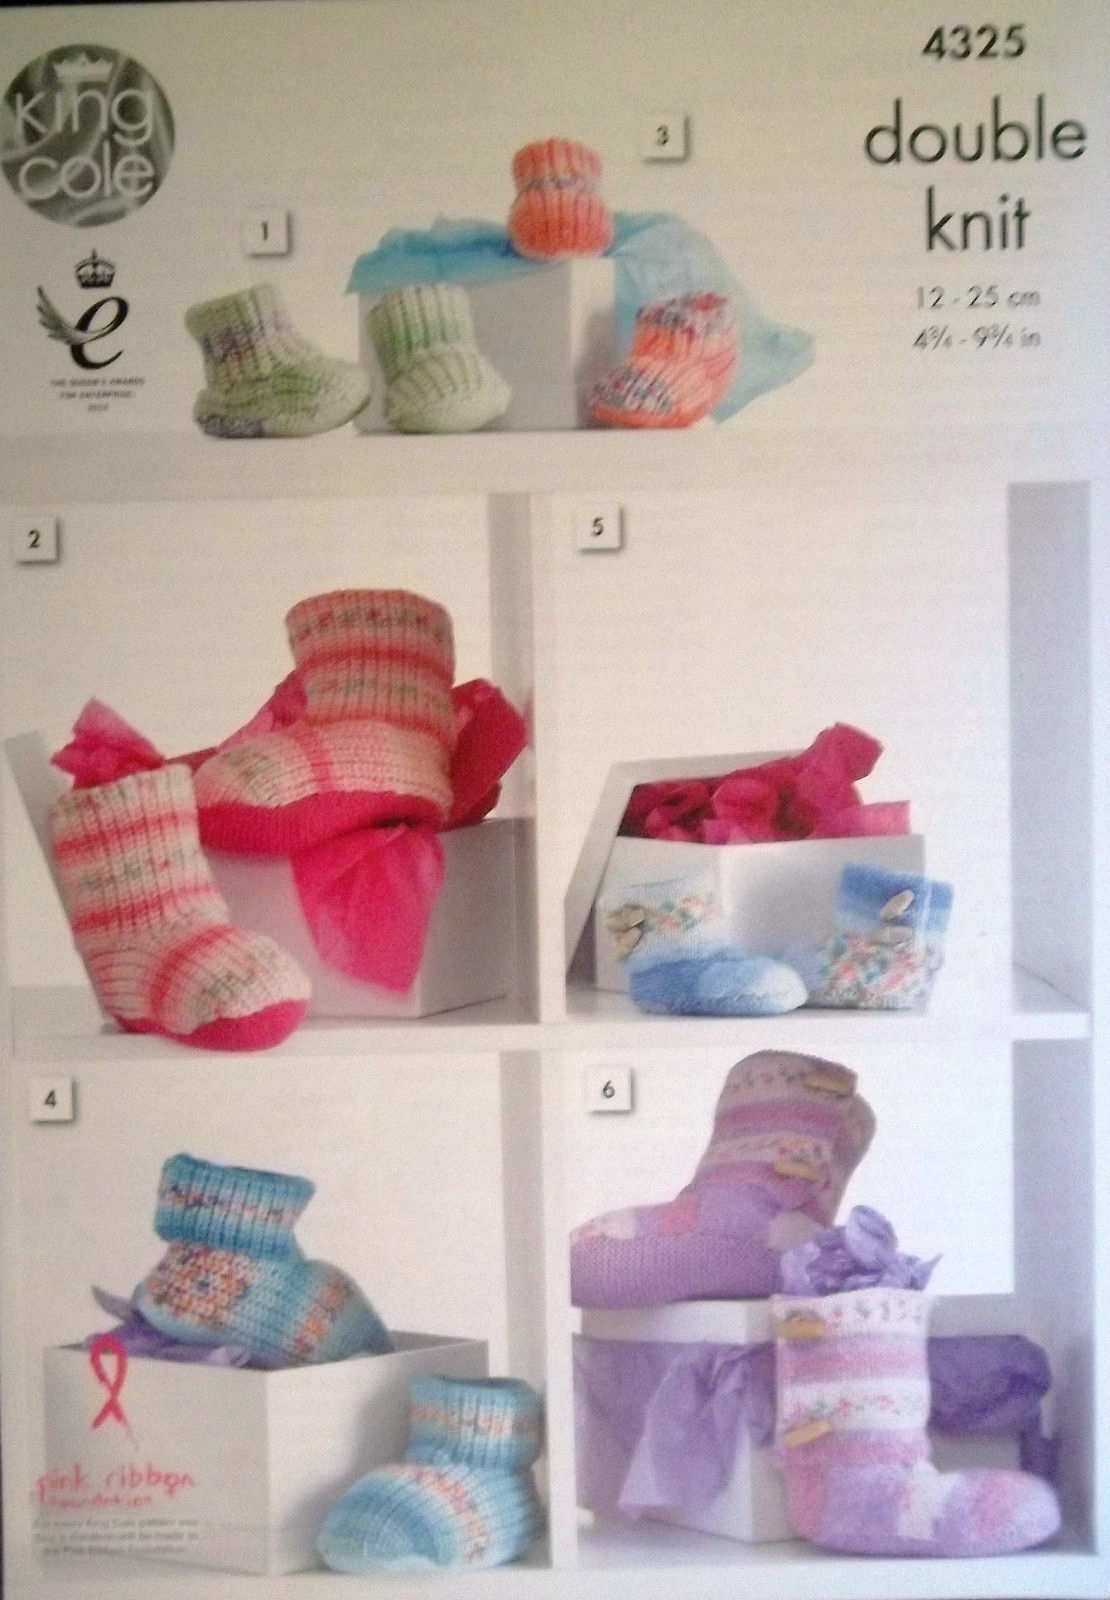 Knitting Patterns For Slipper Boots King Cole Dk Knitting Pattern Boots Hug Slippers Babies Childs Adults 4325